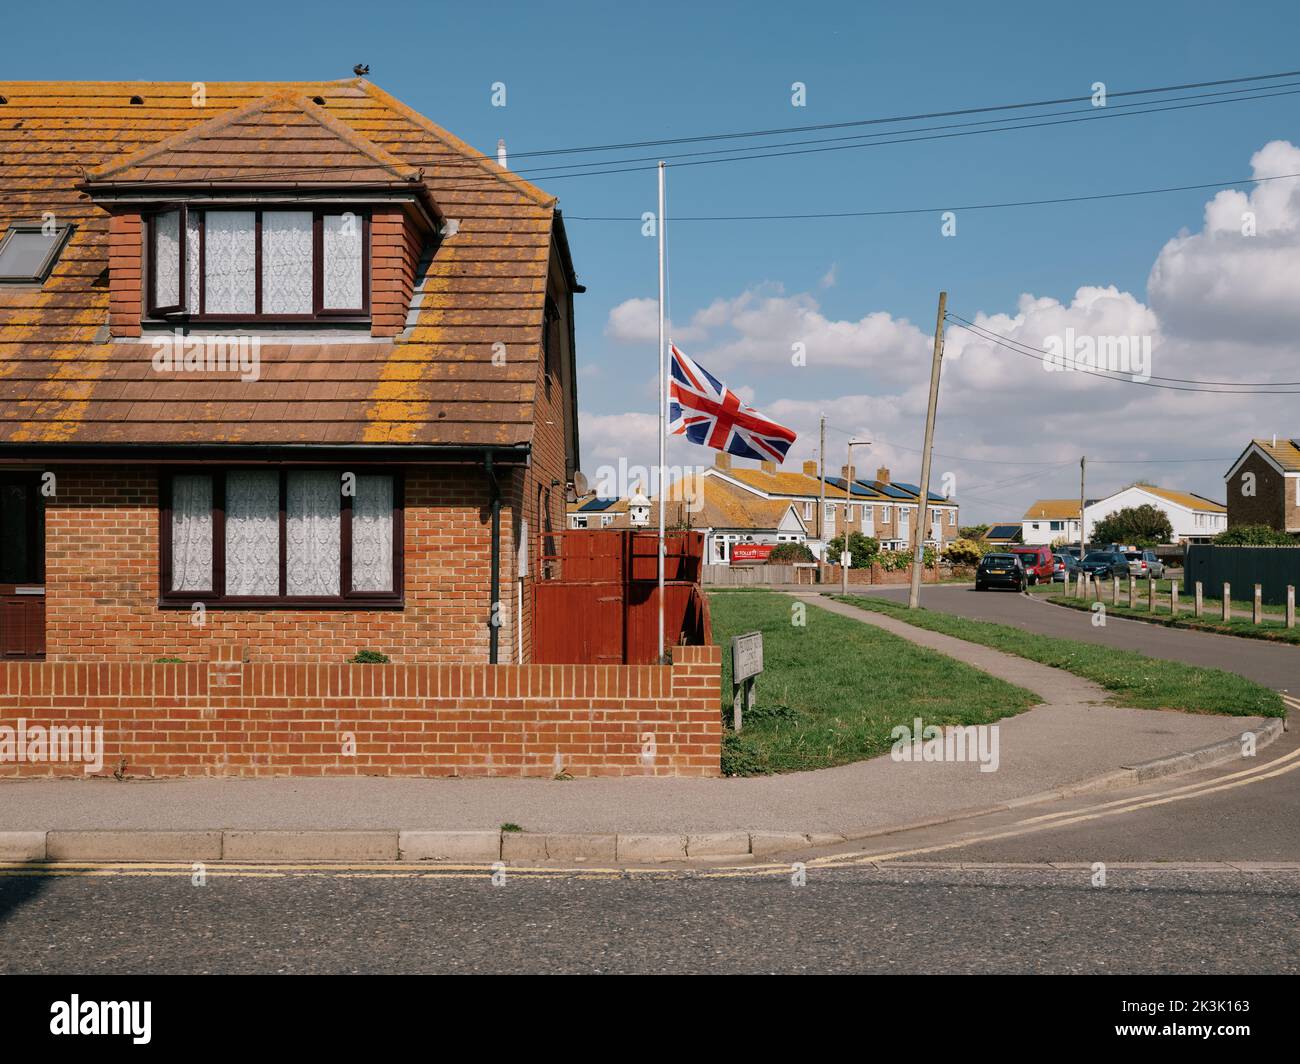 A UK Union Flag flies at half mast in mourning for the Queen's passing in a suburban residential housing estate Lydd, Sussex, England, UK - Sept 2022 Stock Photo